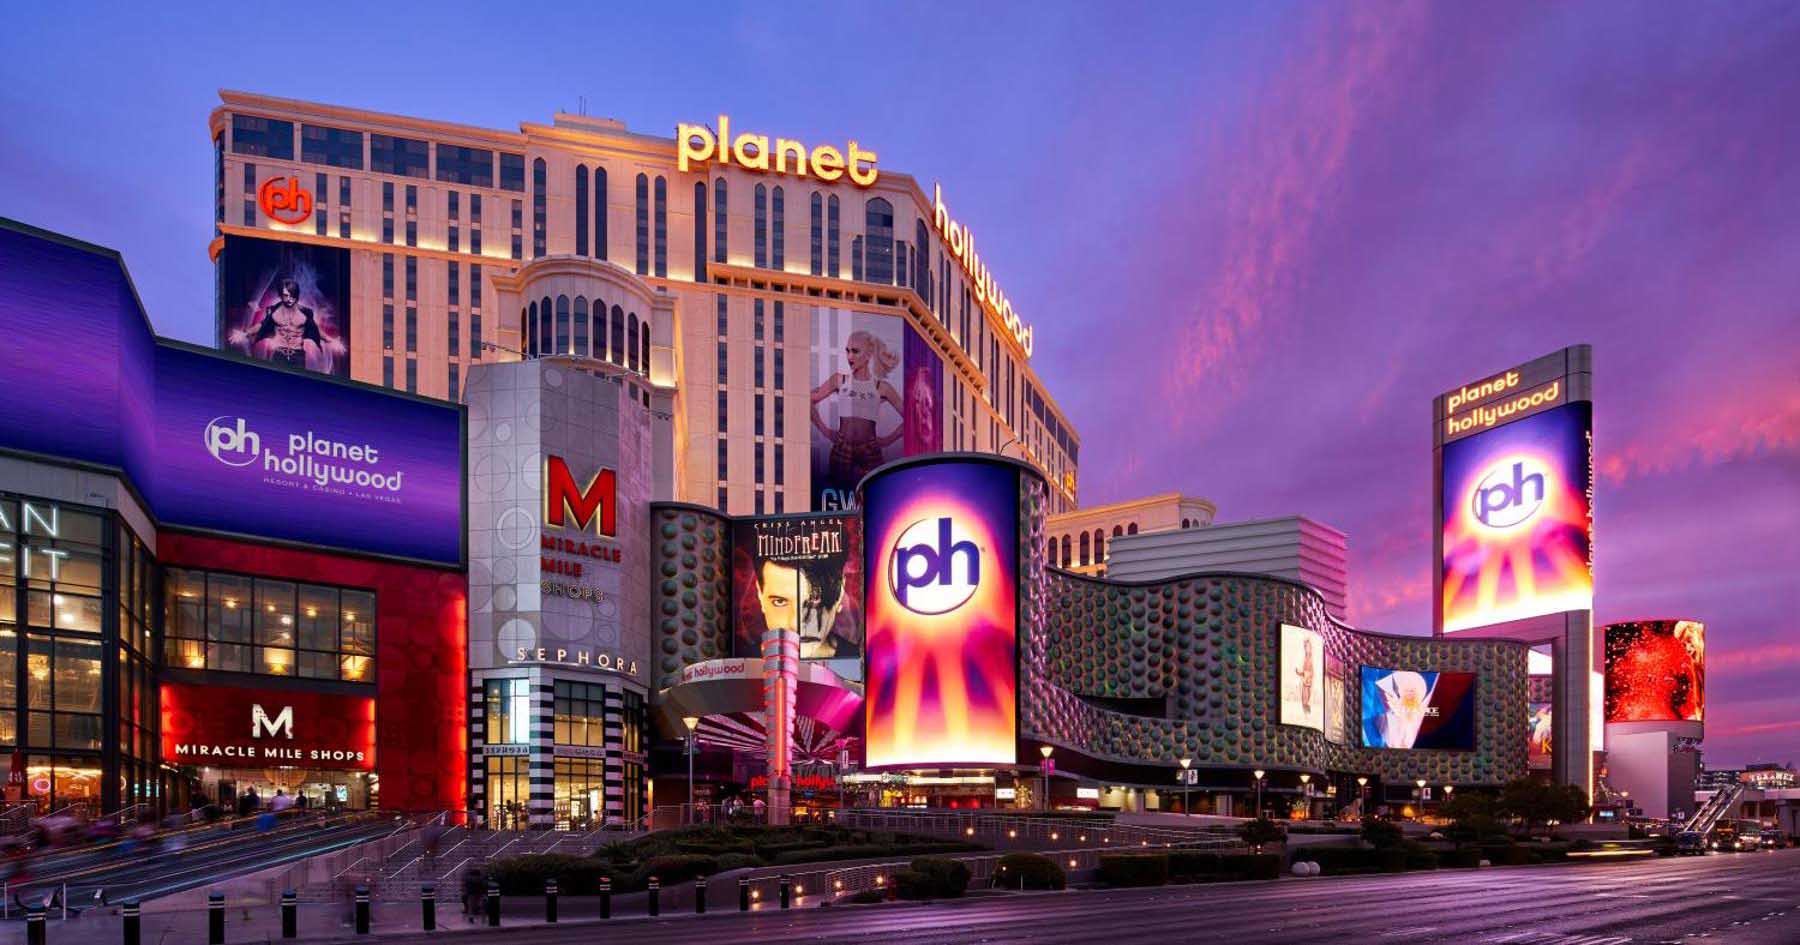 Planet Hollywood Las Vegas hotels review